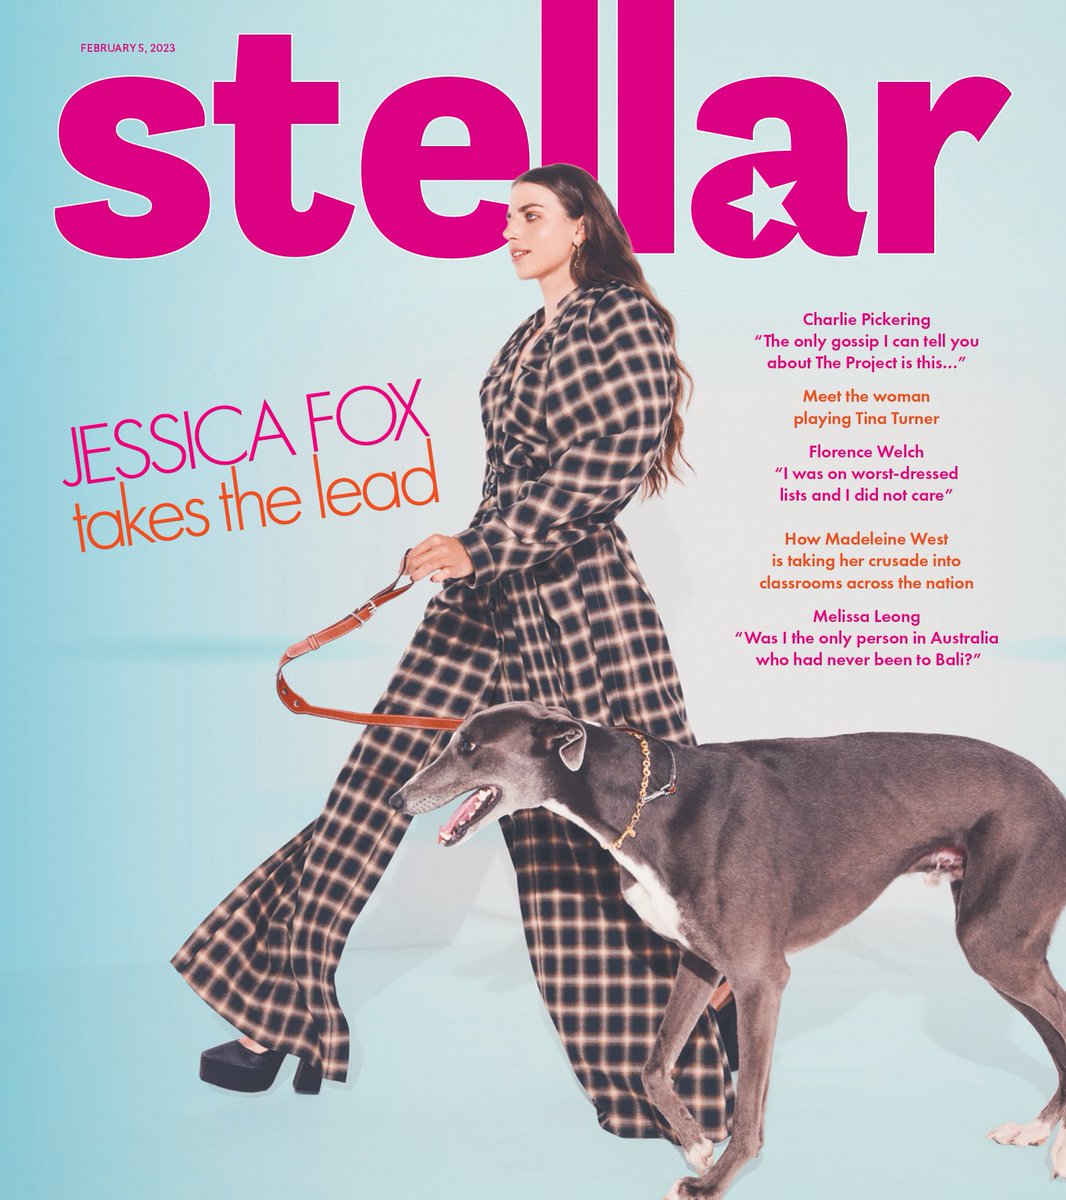 SNEAK PEEK 🤩 can’t wait for you to see this weekend’s @StellarMagAU ft a fox & some adorable @GAPNSW greyhounds ! Catch us in this Sunday's Stellar, inside The Sunday Telegraph (NSW), Sunday Herald Sun (VIC), The Sunday Mail (QLD) & Sunday Mail (SA). Thanks to the whole team 🤩